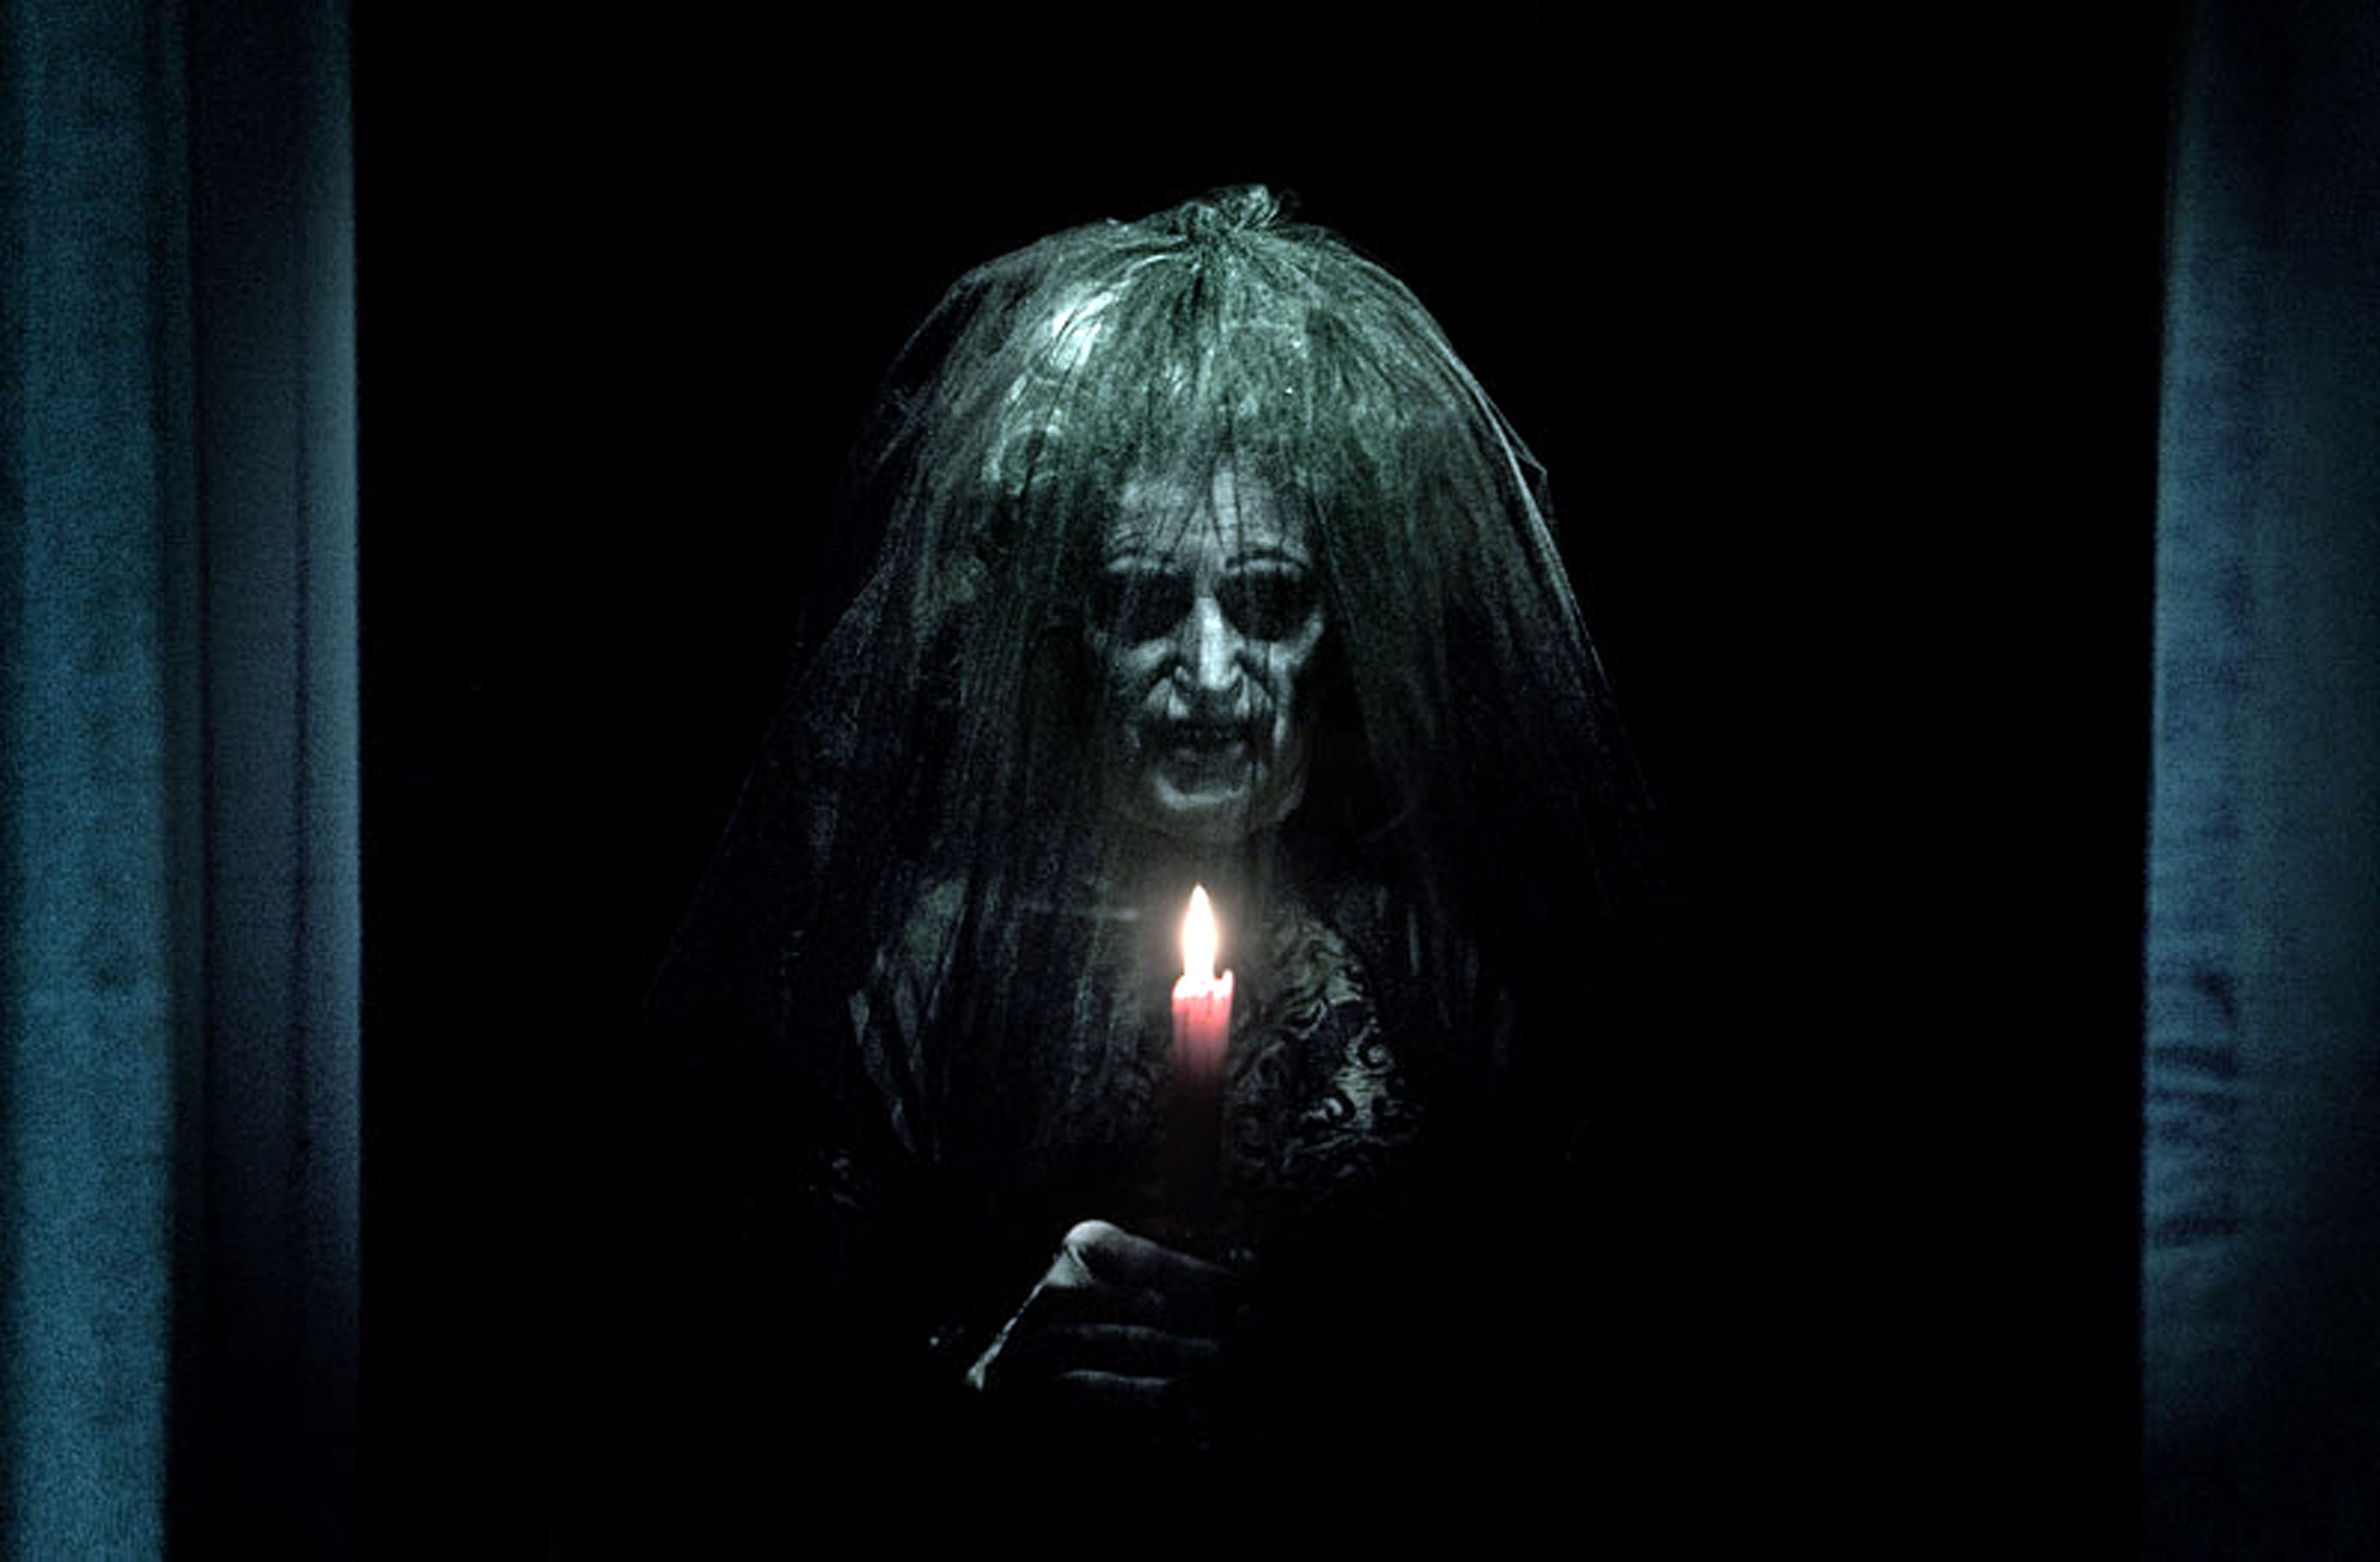 An old woman in a black dress holds a candle to her face